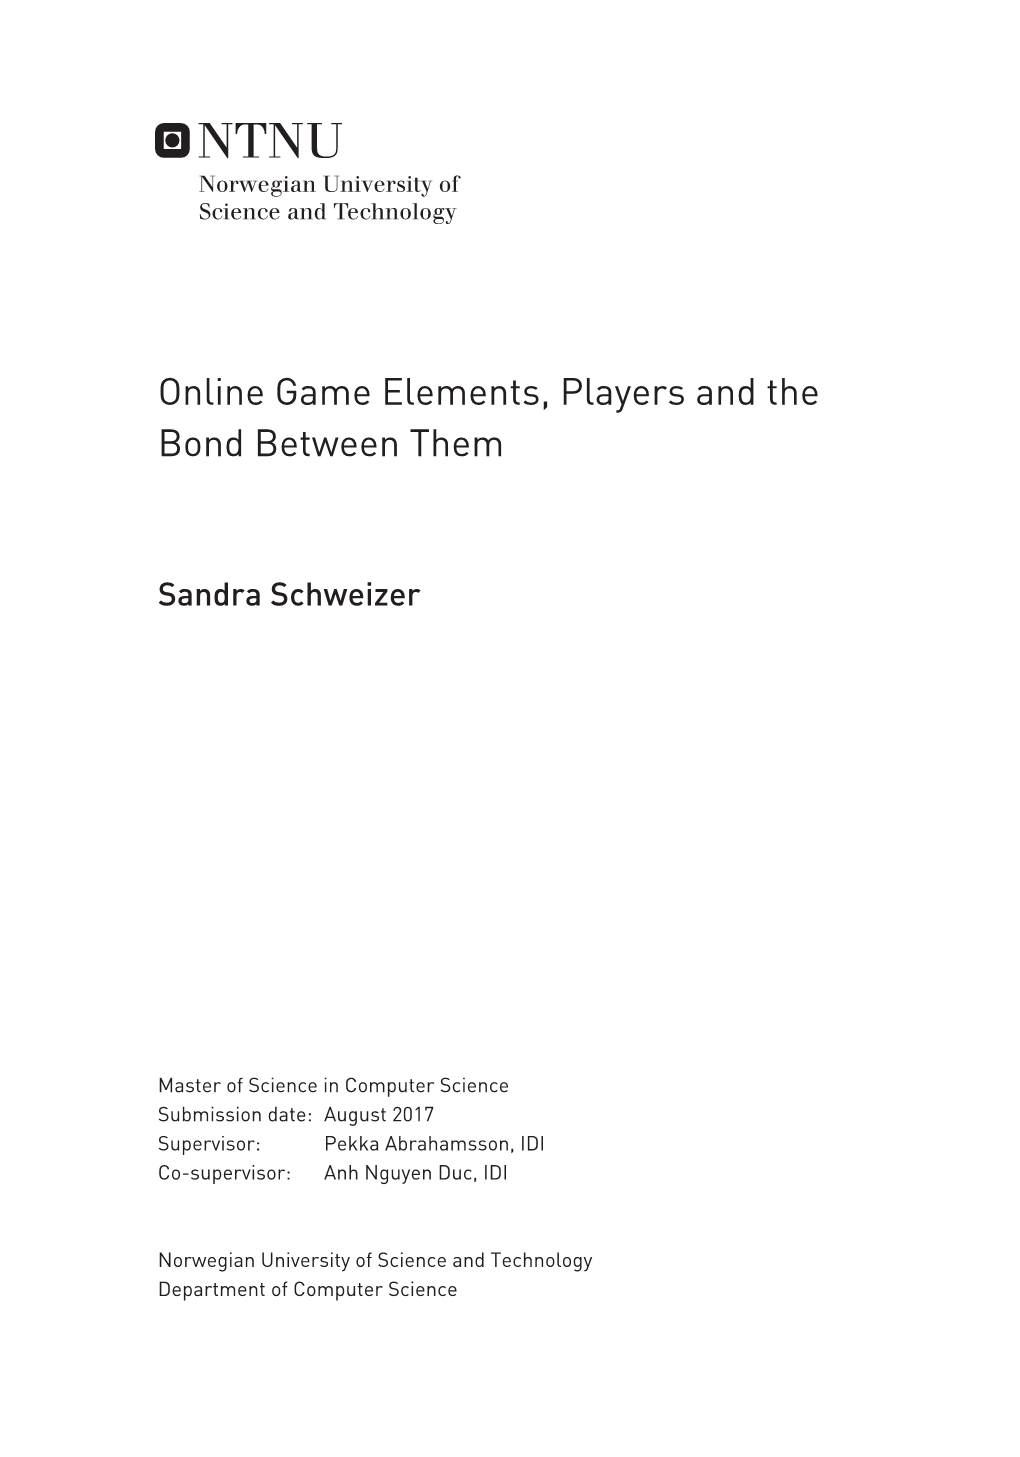 Online Game Elements, Players and the Bond Between Them